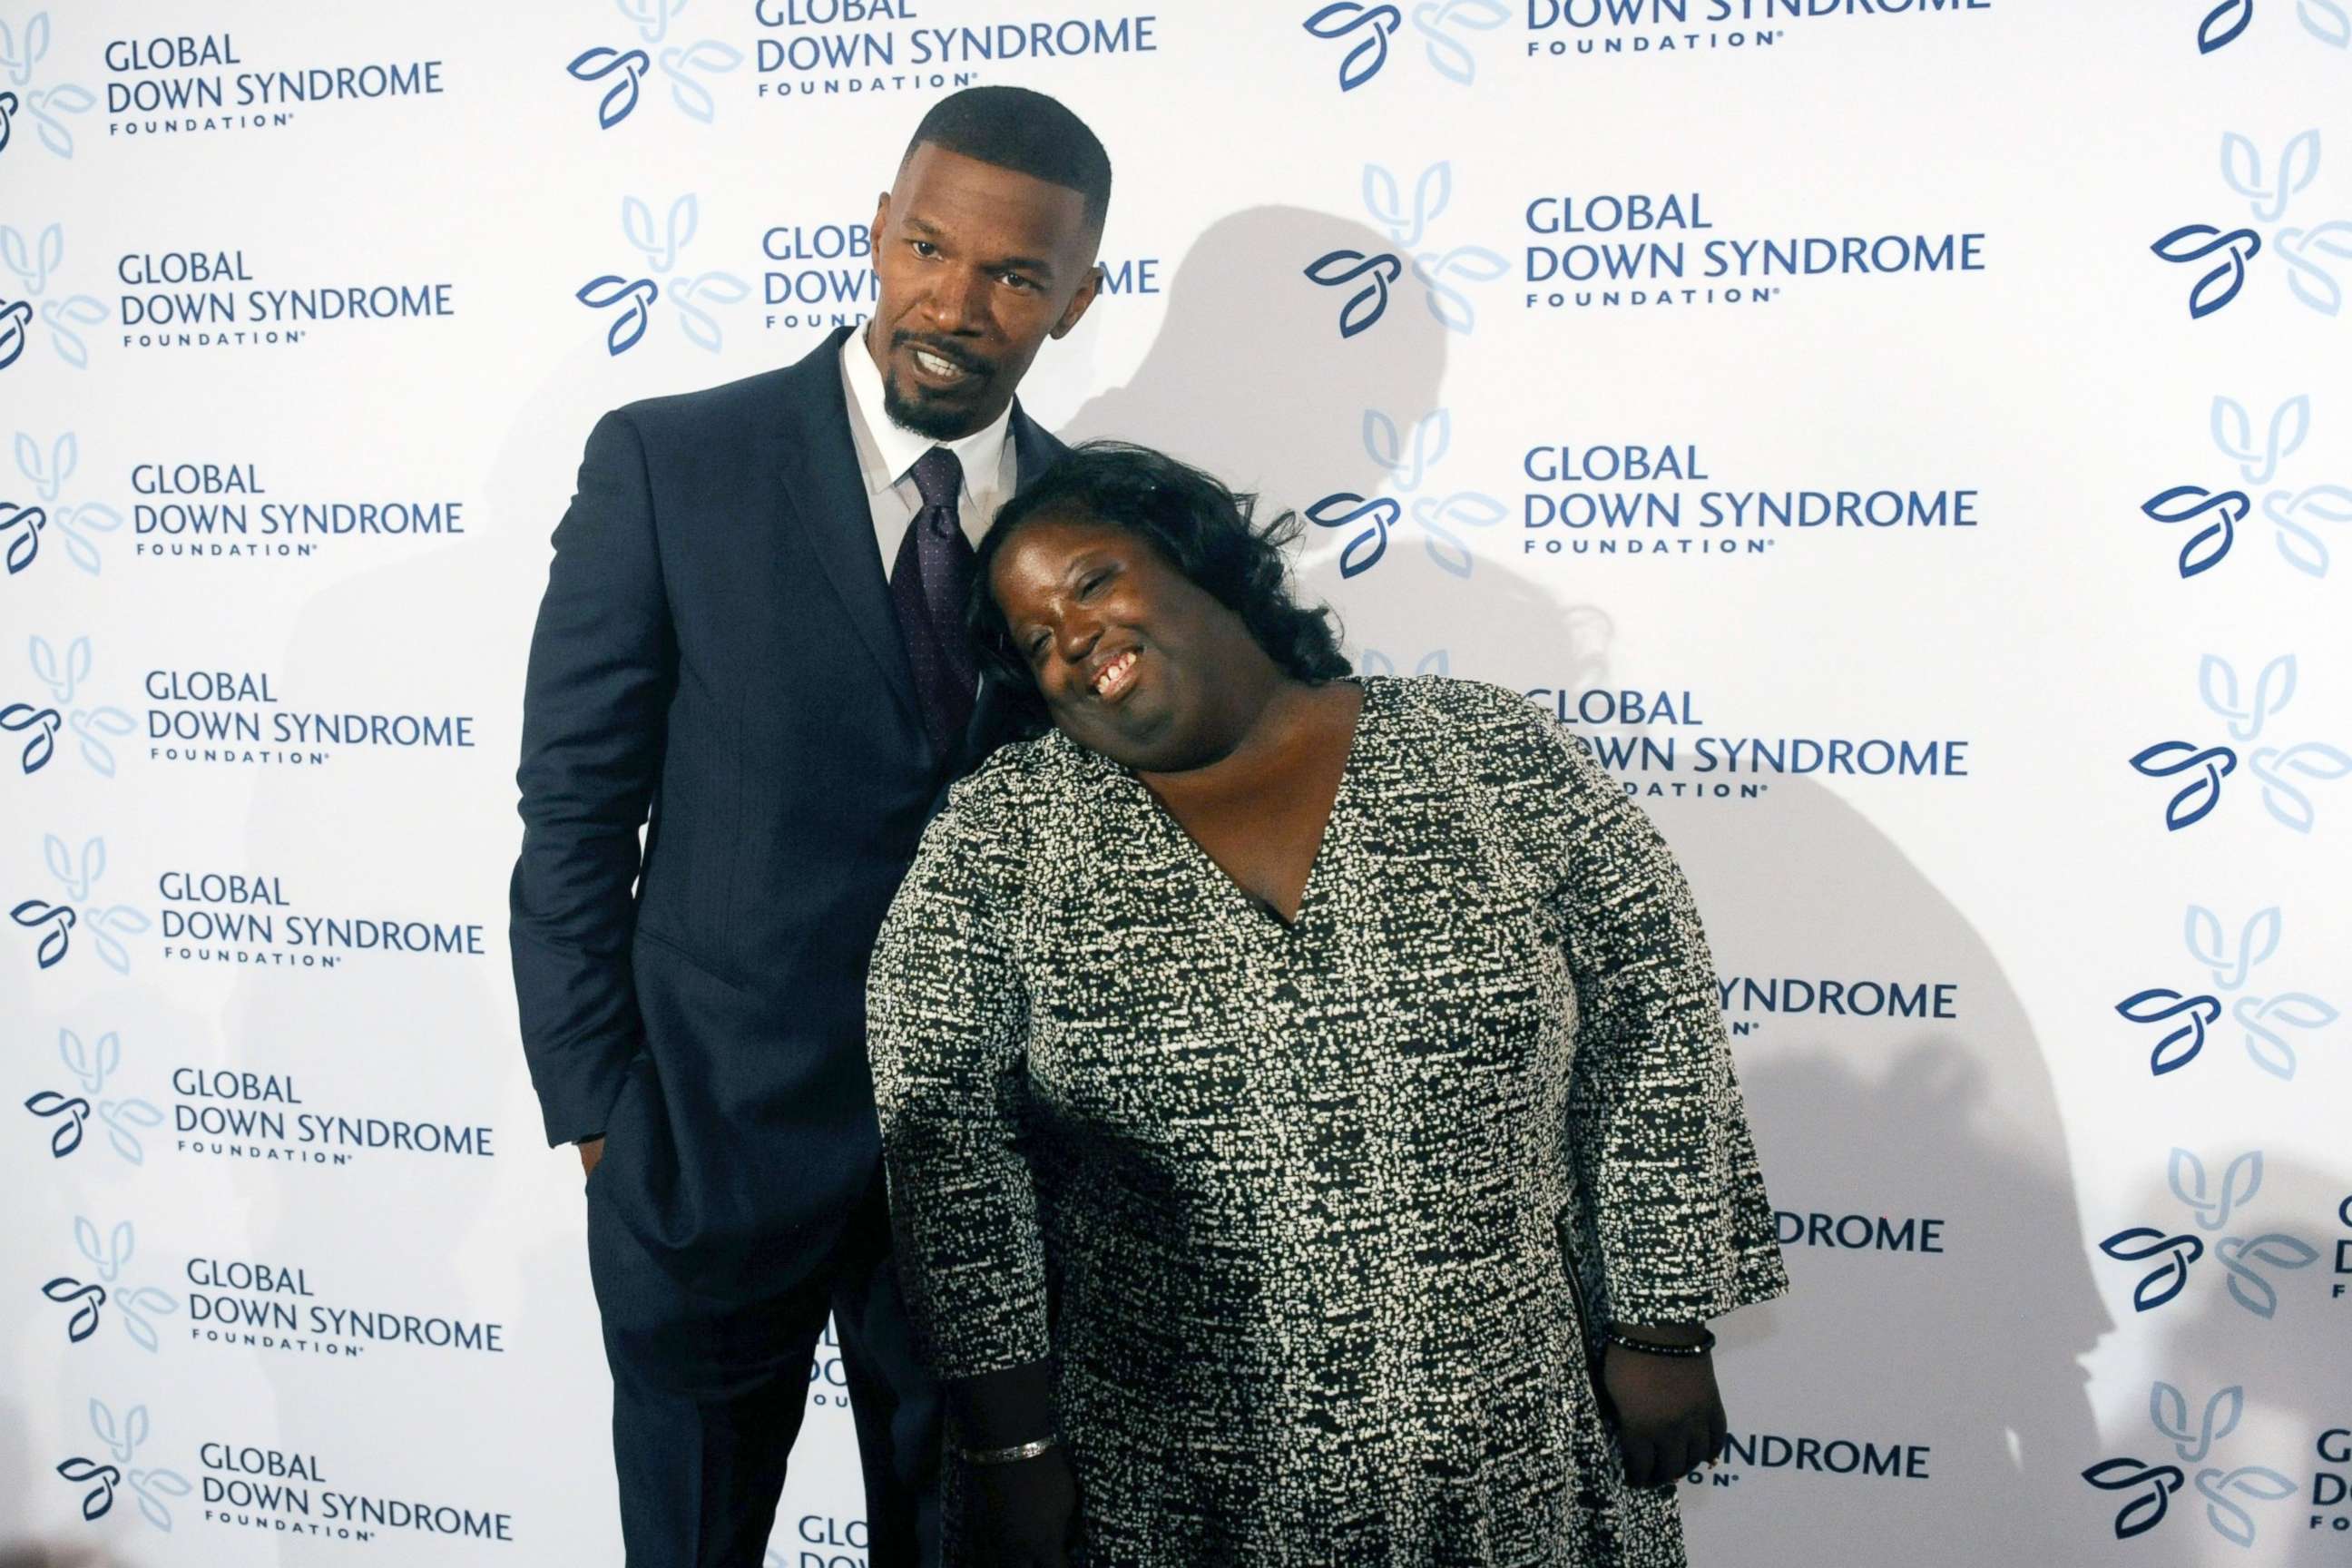 PHOTO: In this Nov. 12, 2016 file photo Jamie Foxx poses for pictures with his sister DeOndra Dixon before the start of the 2016 Global Down Syndrome Foundation "Be Beautiful, Be Yourself" fashion show at the Colorado Convention Center in Denver.
